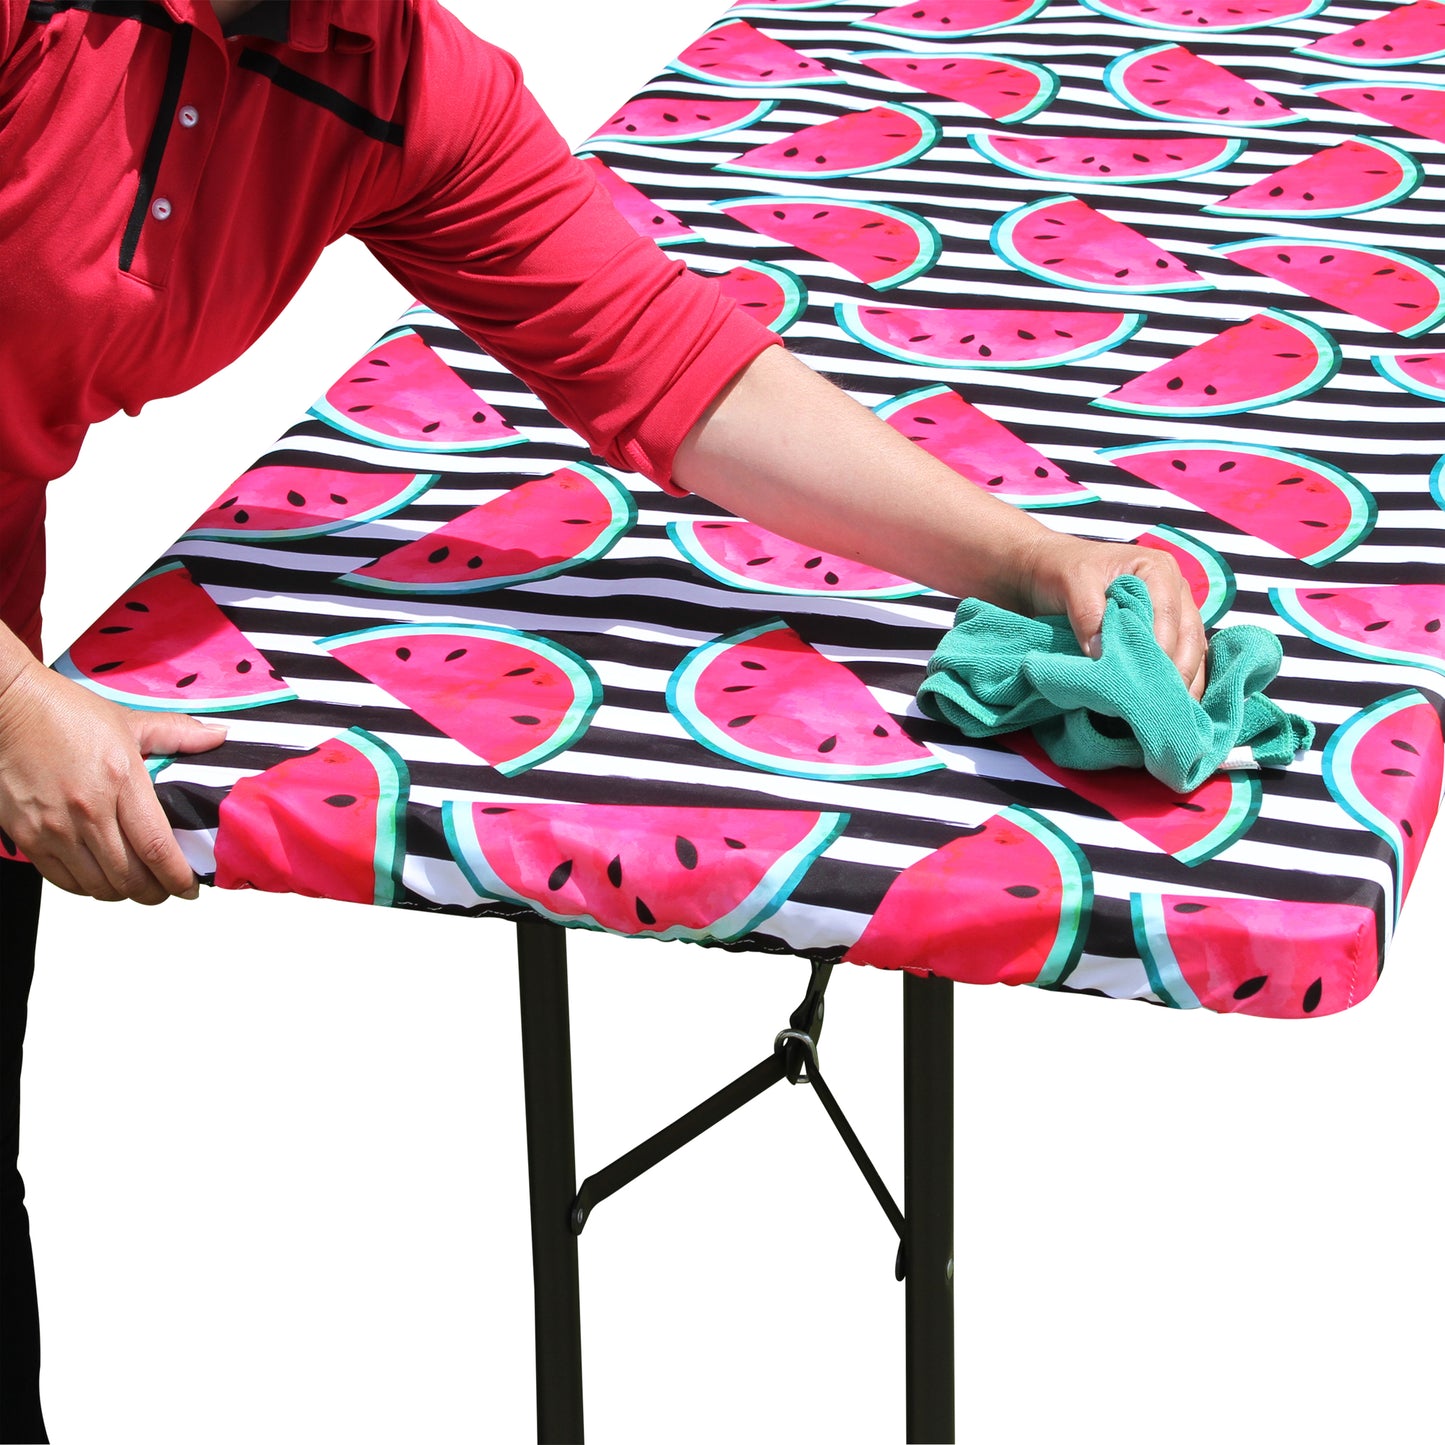 TableCloth PLUS 72" Watermelon Fitted PEVA Vinyl Tablecloth for 6' Folding Tables wipes clean easily